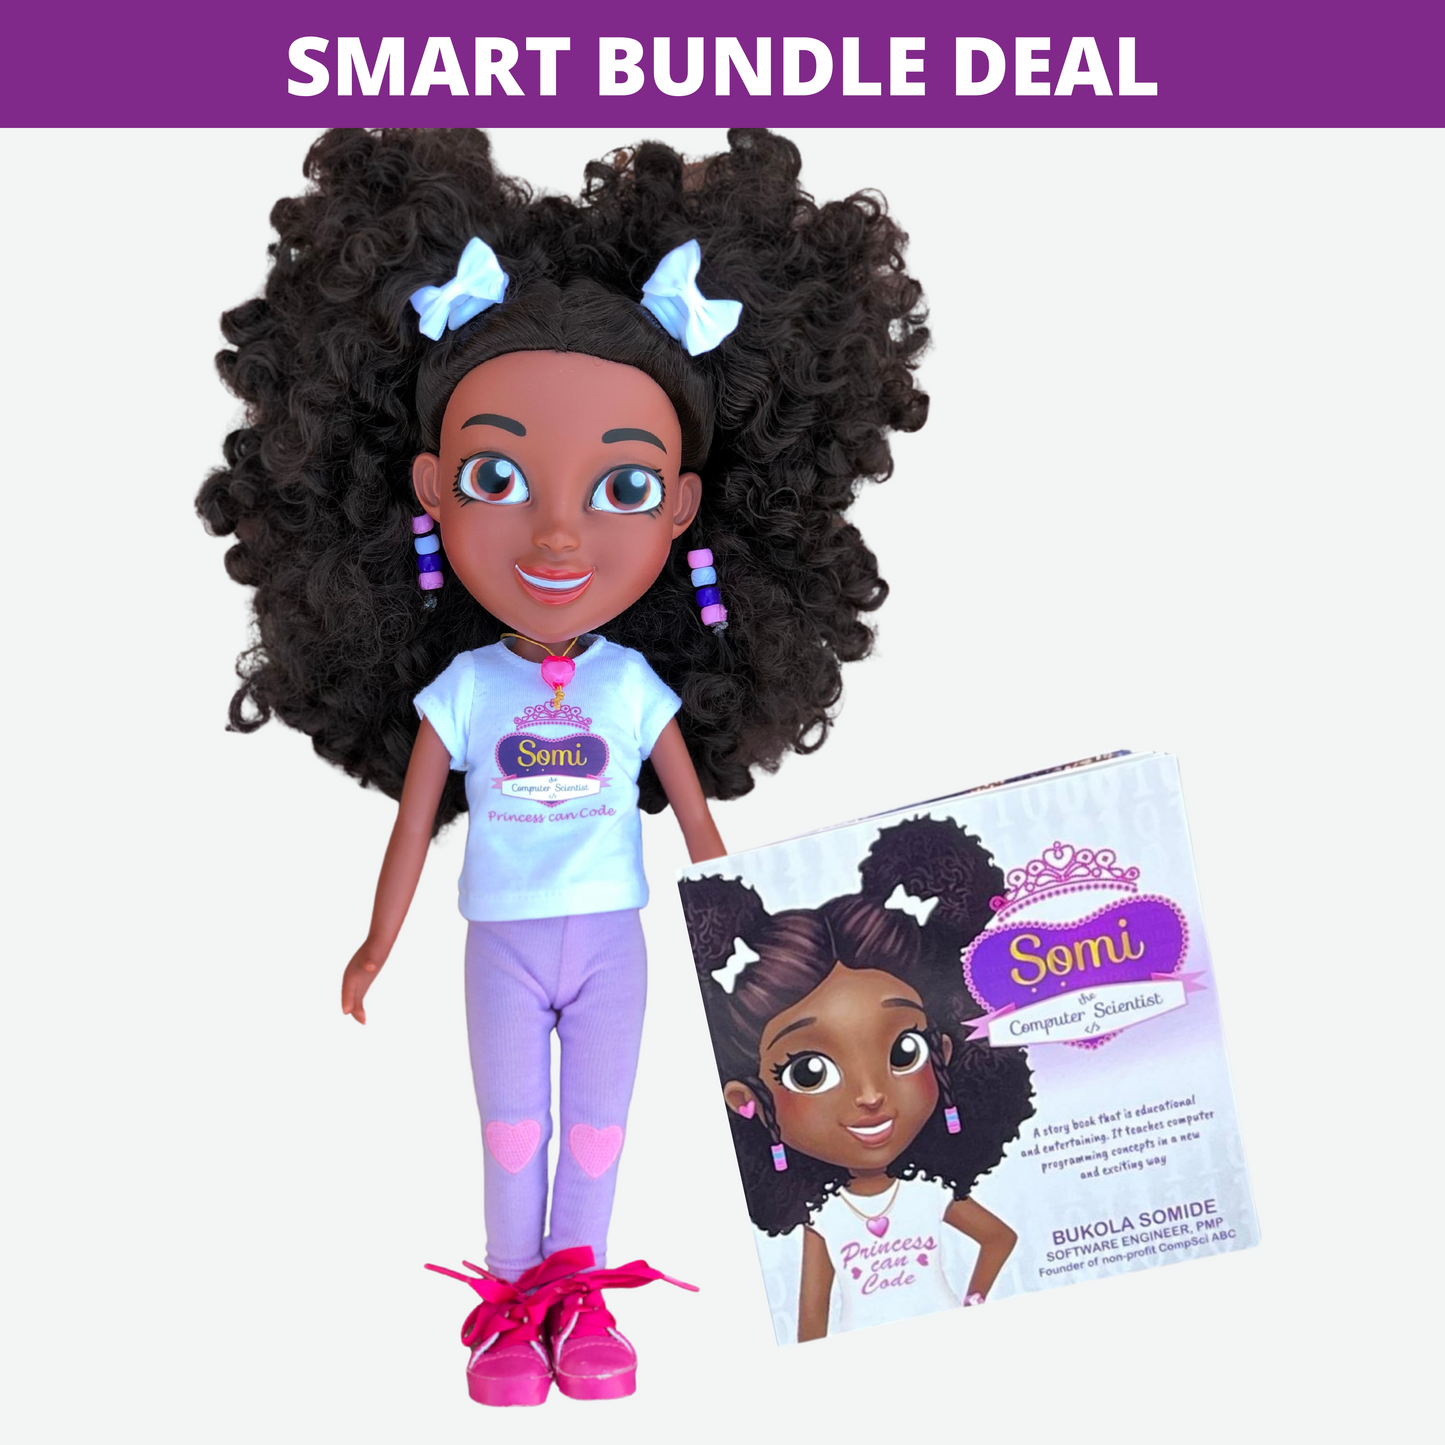 Smart Bundle Kit: STEM Storybook with 14-inch Somi the Computer Scientist Interactive Doll